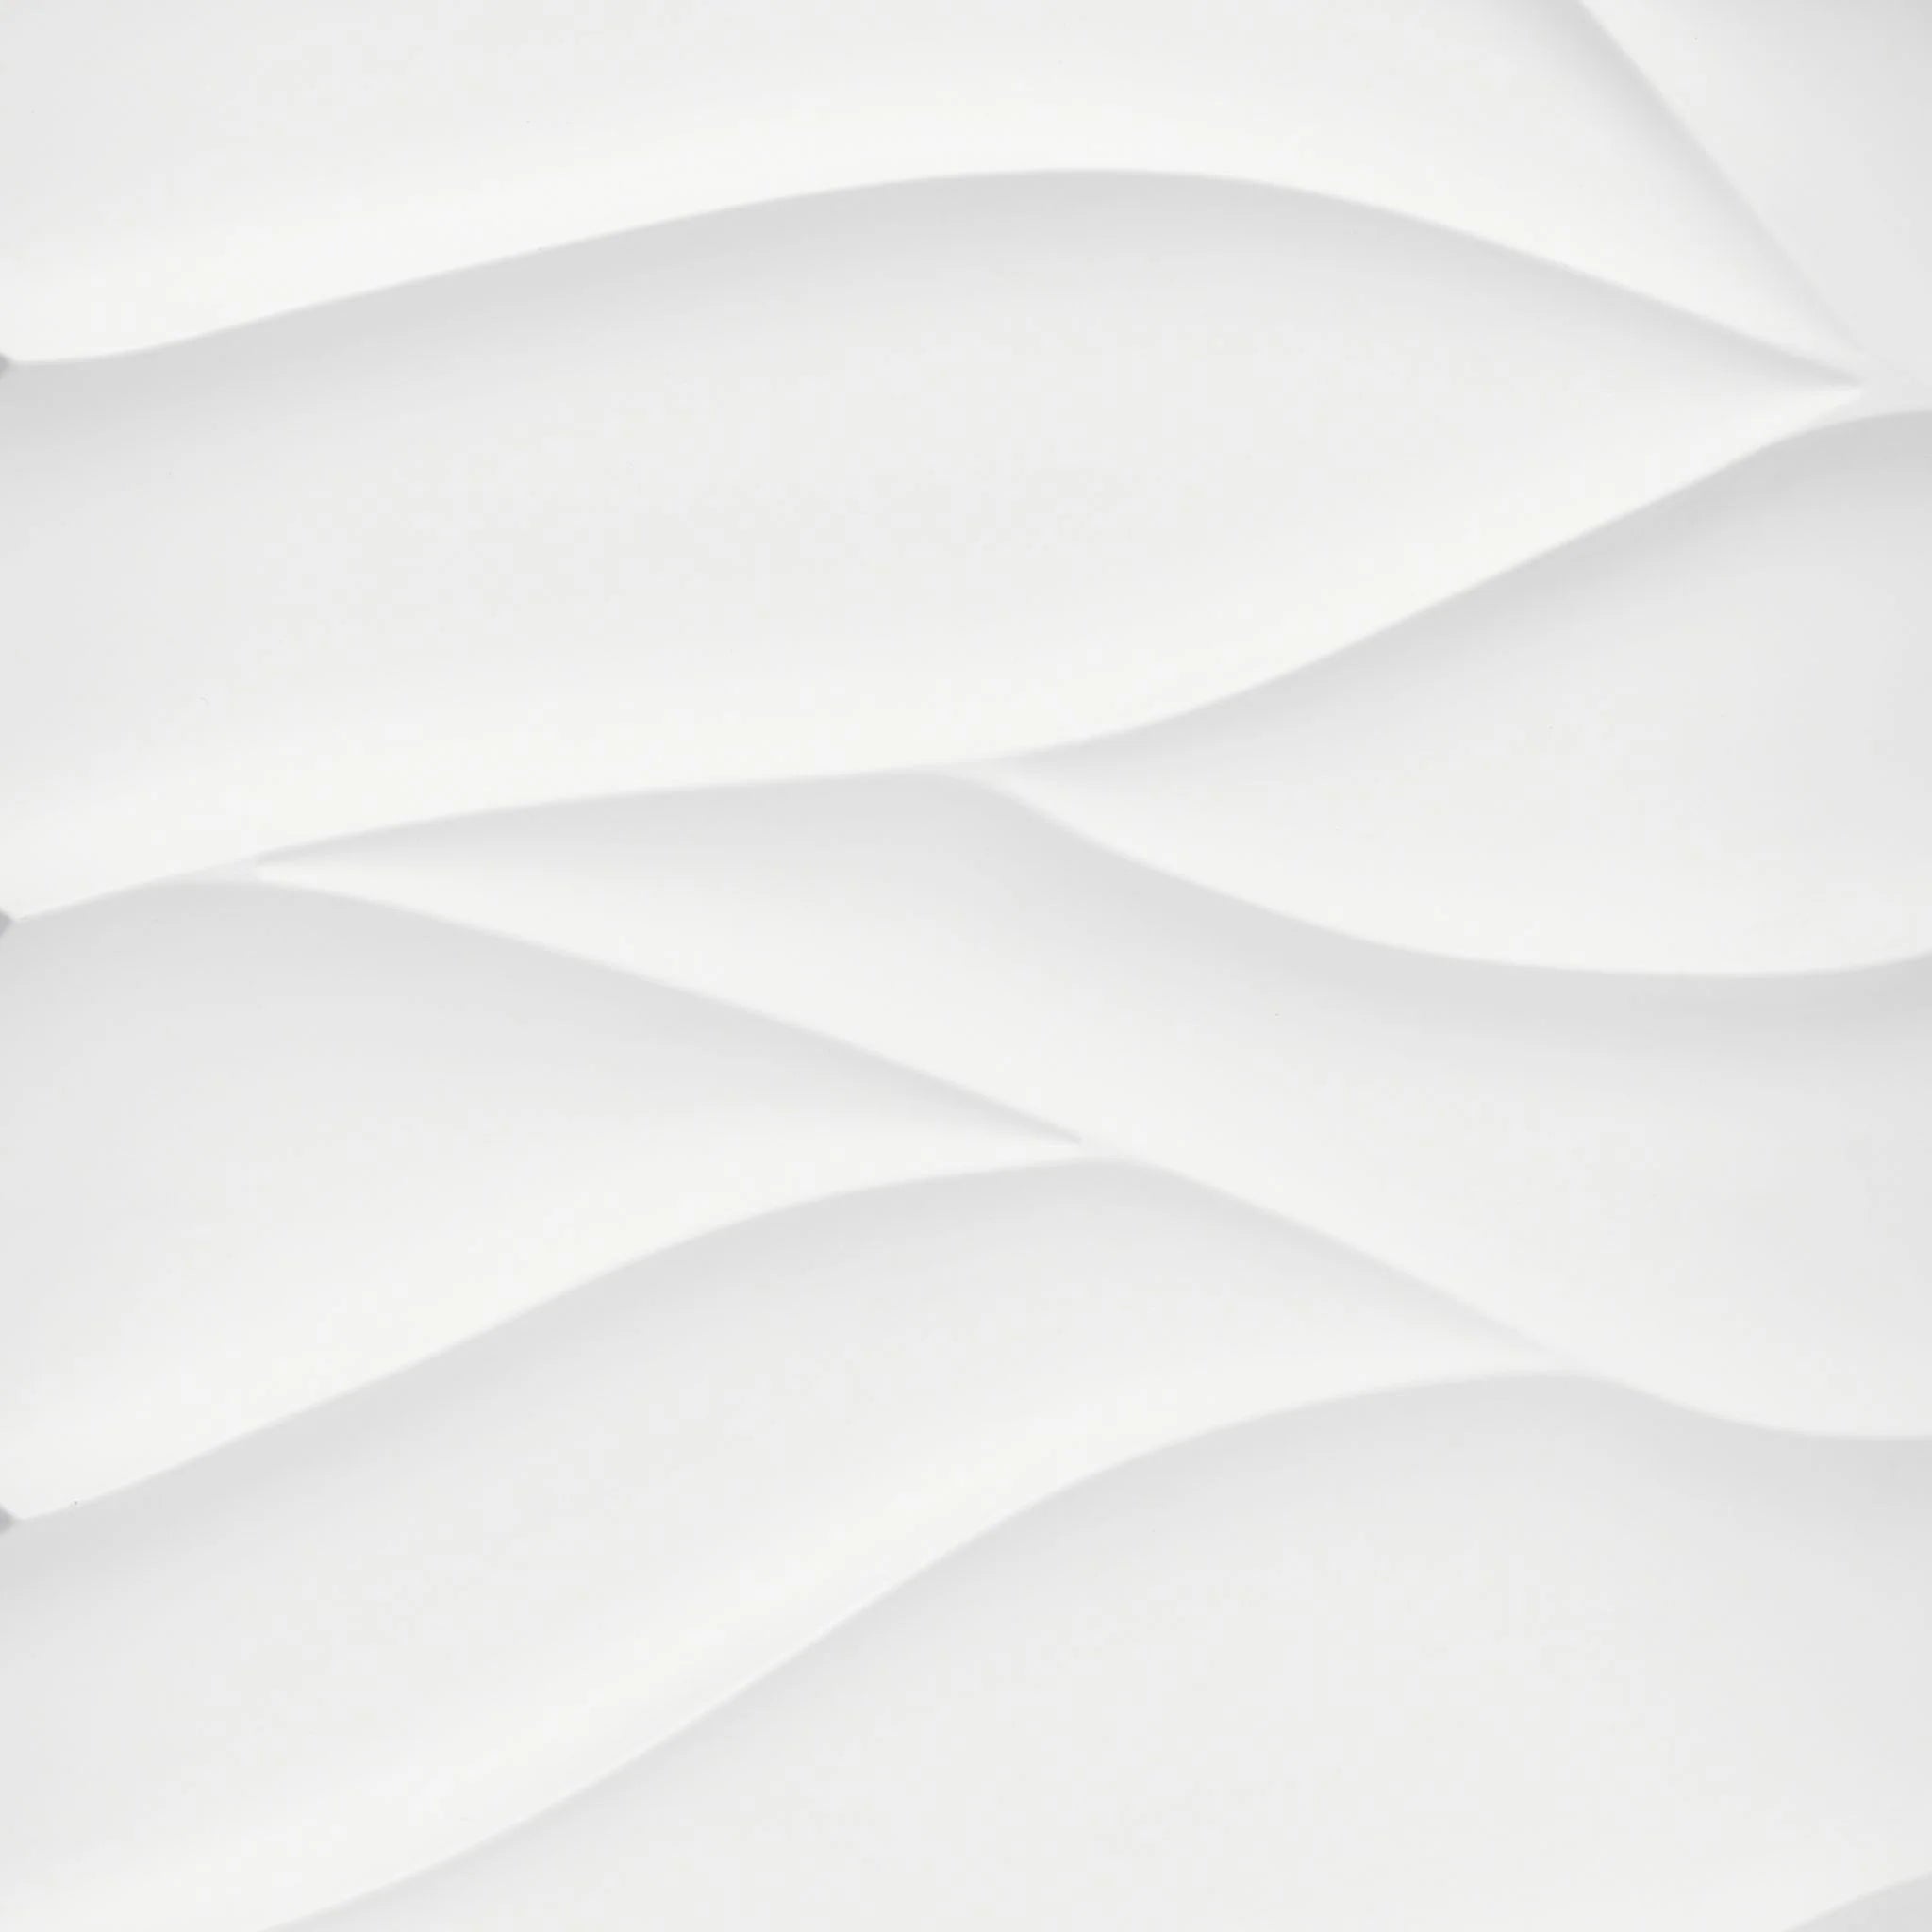 Close-up of white PVC wall panel with wavy designs